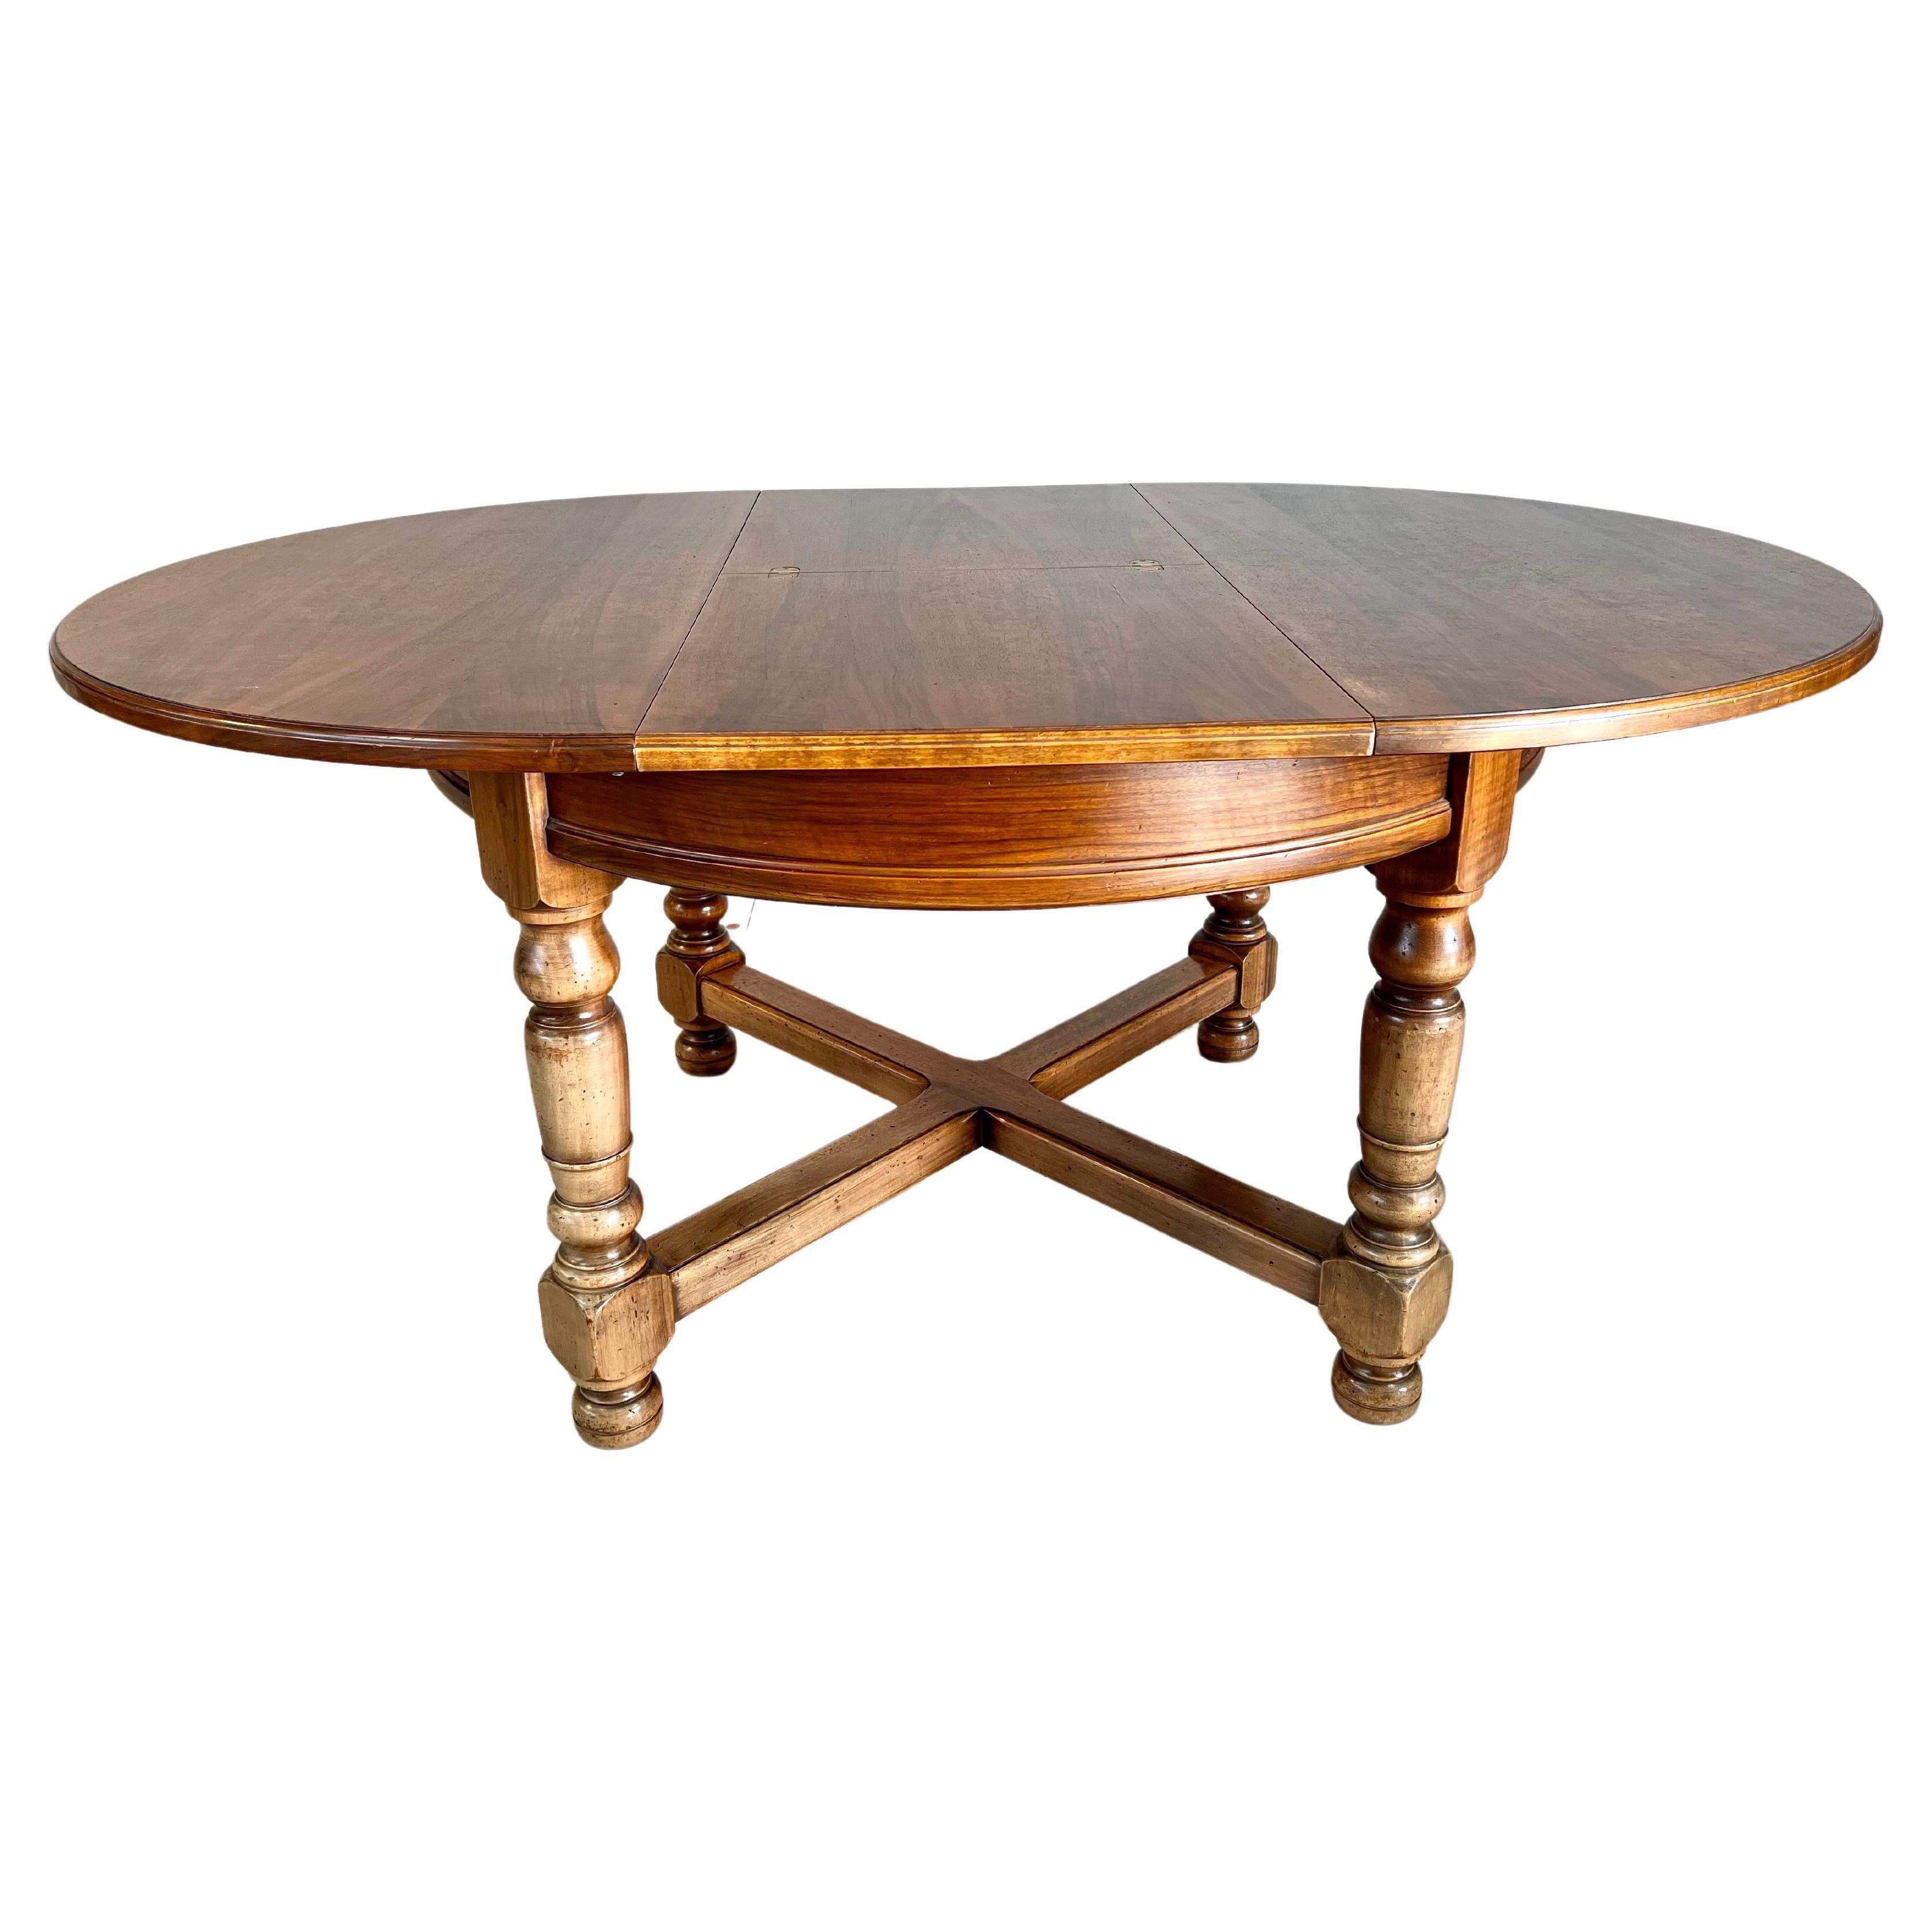 Extendable French Farmhouse Oak Dining Table